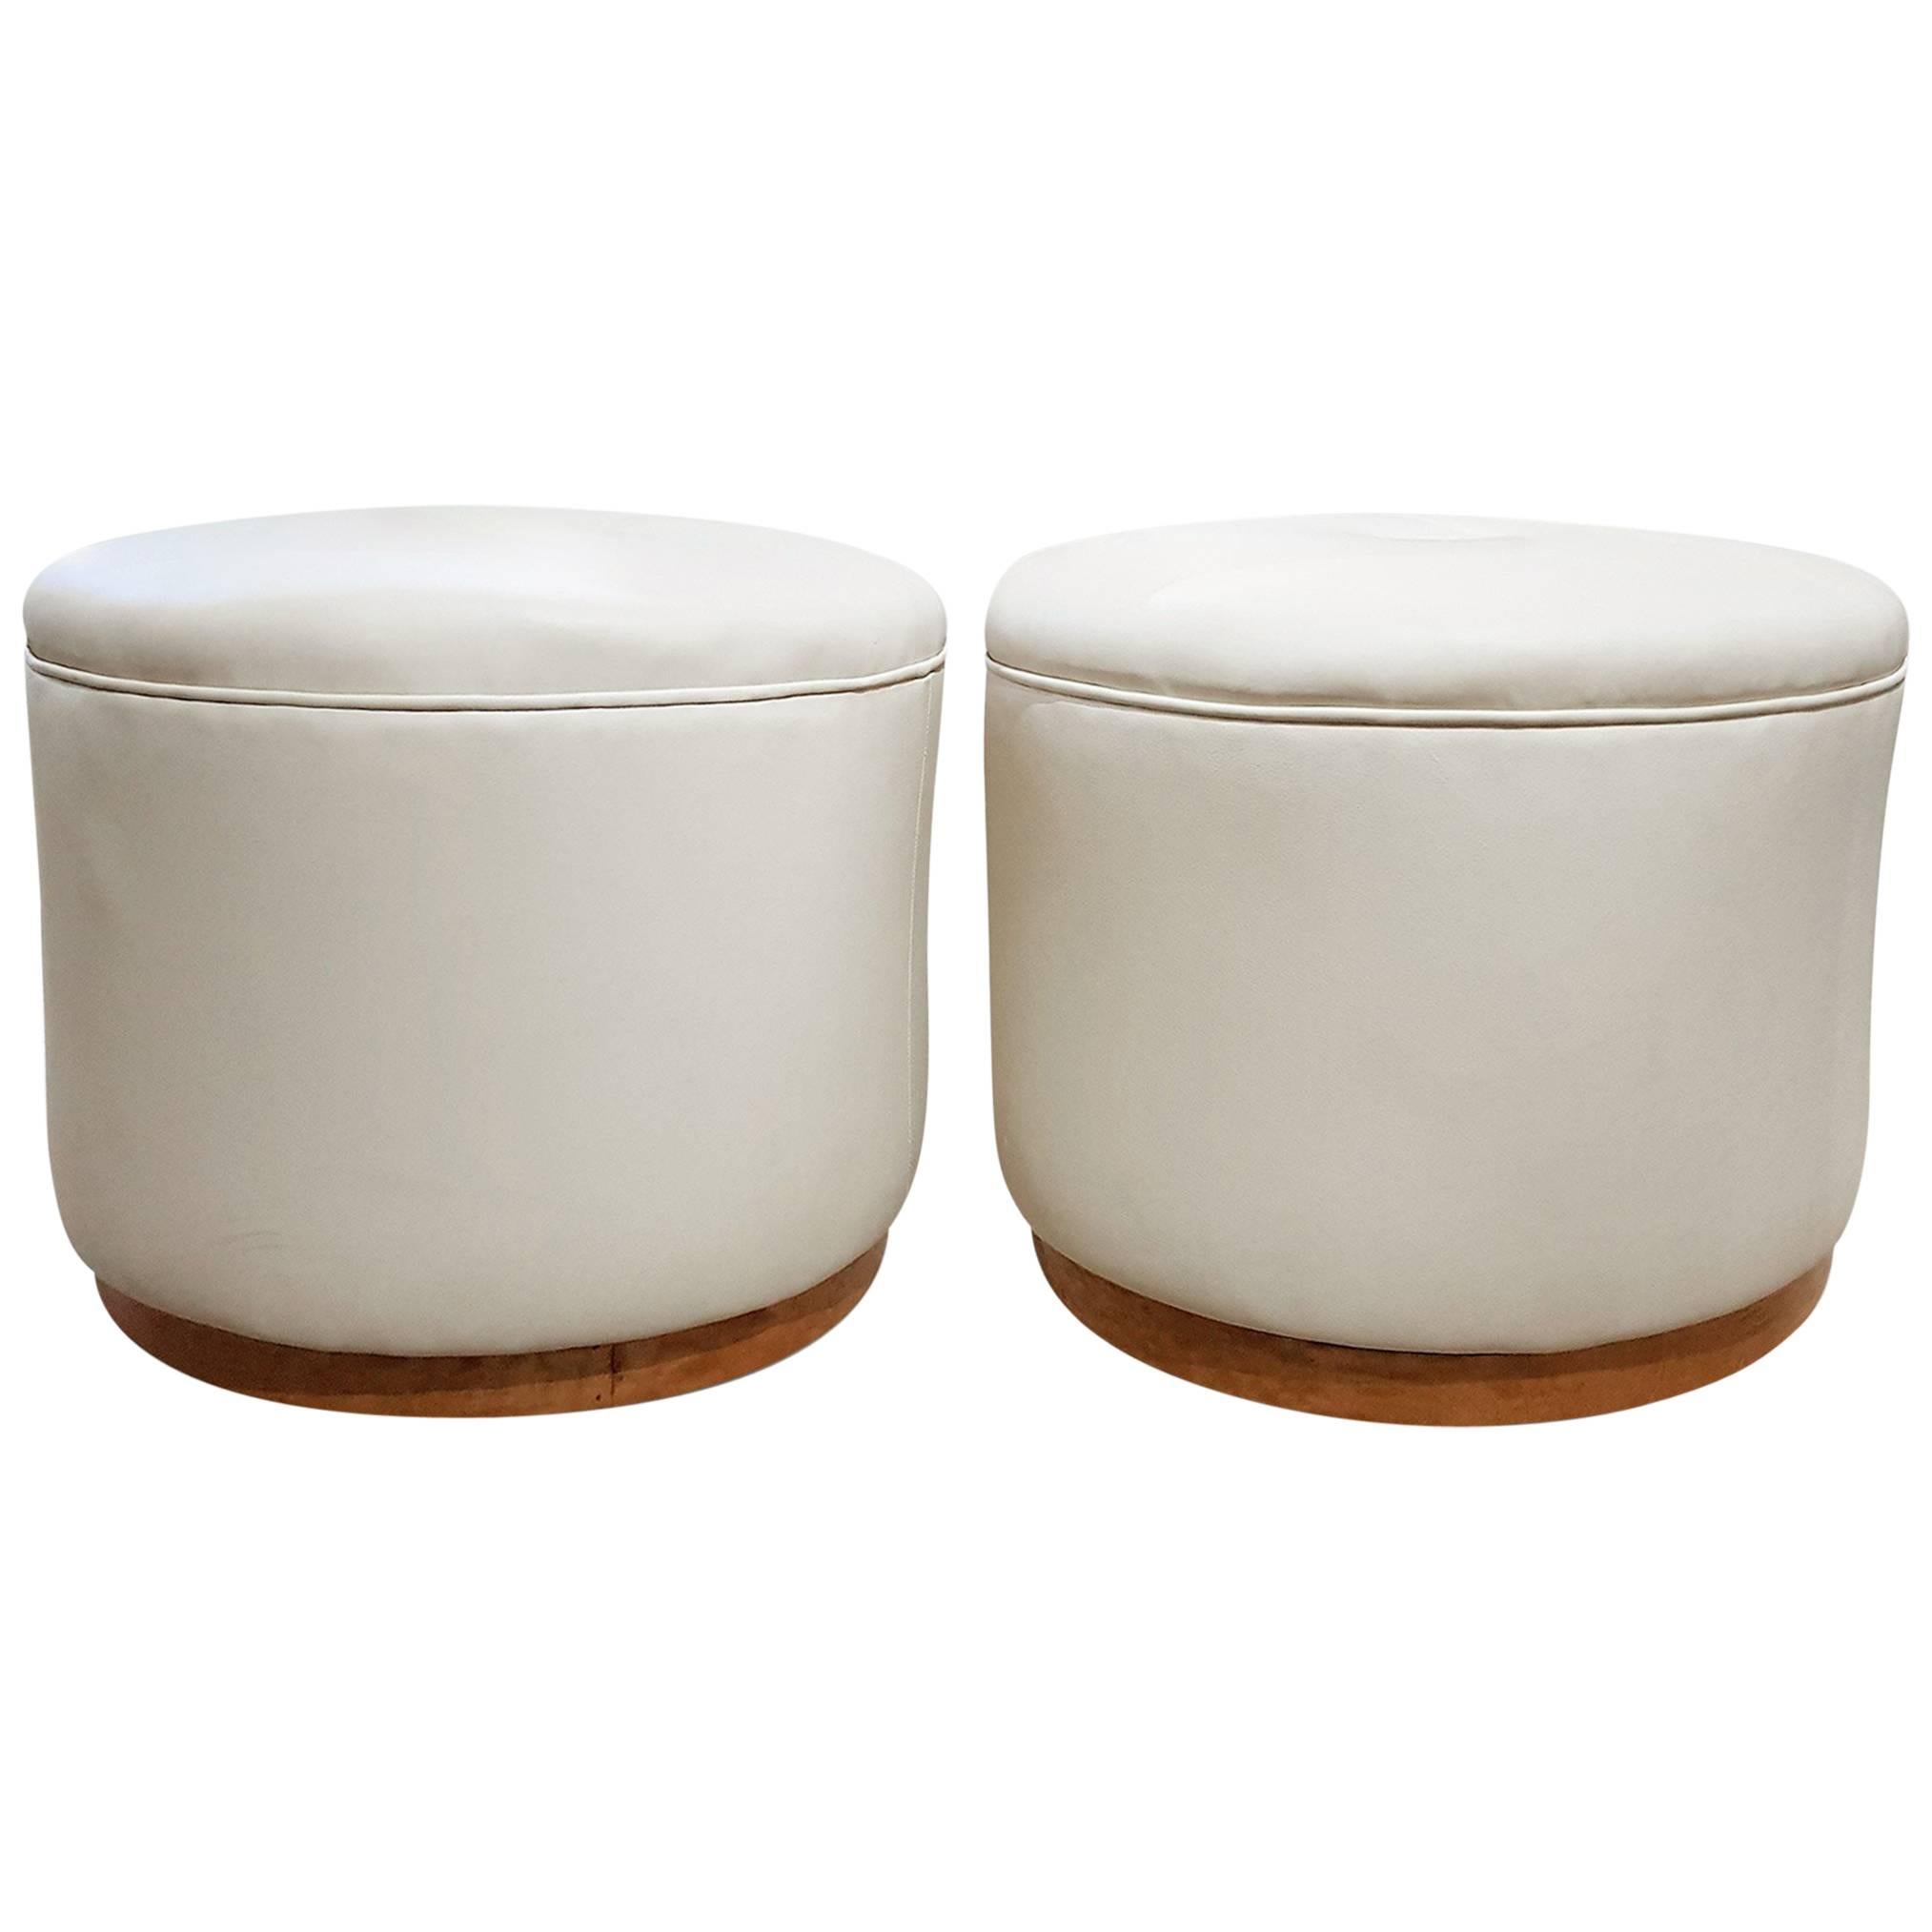 Pair of Art Deco Pouffe Stools with Maple Veneers For Sale